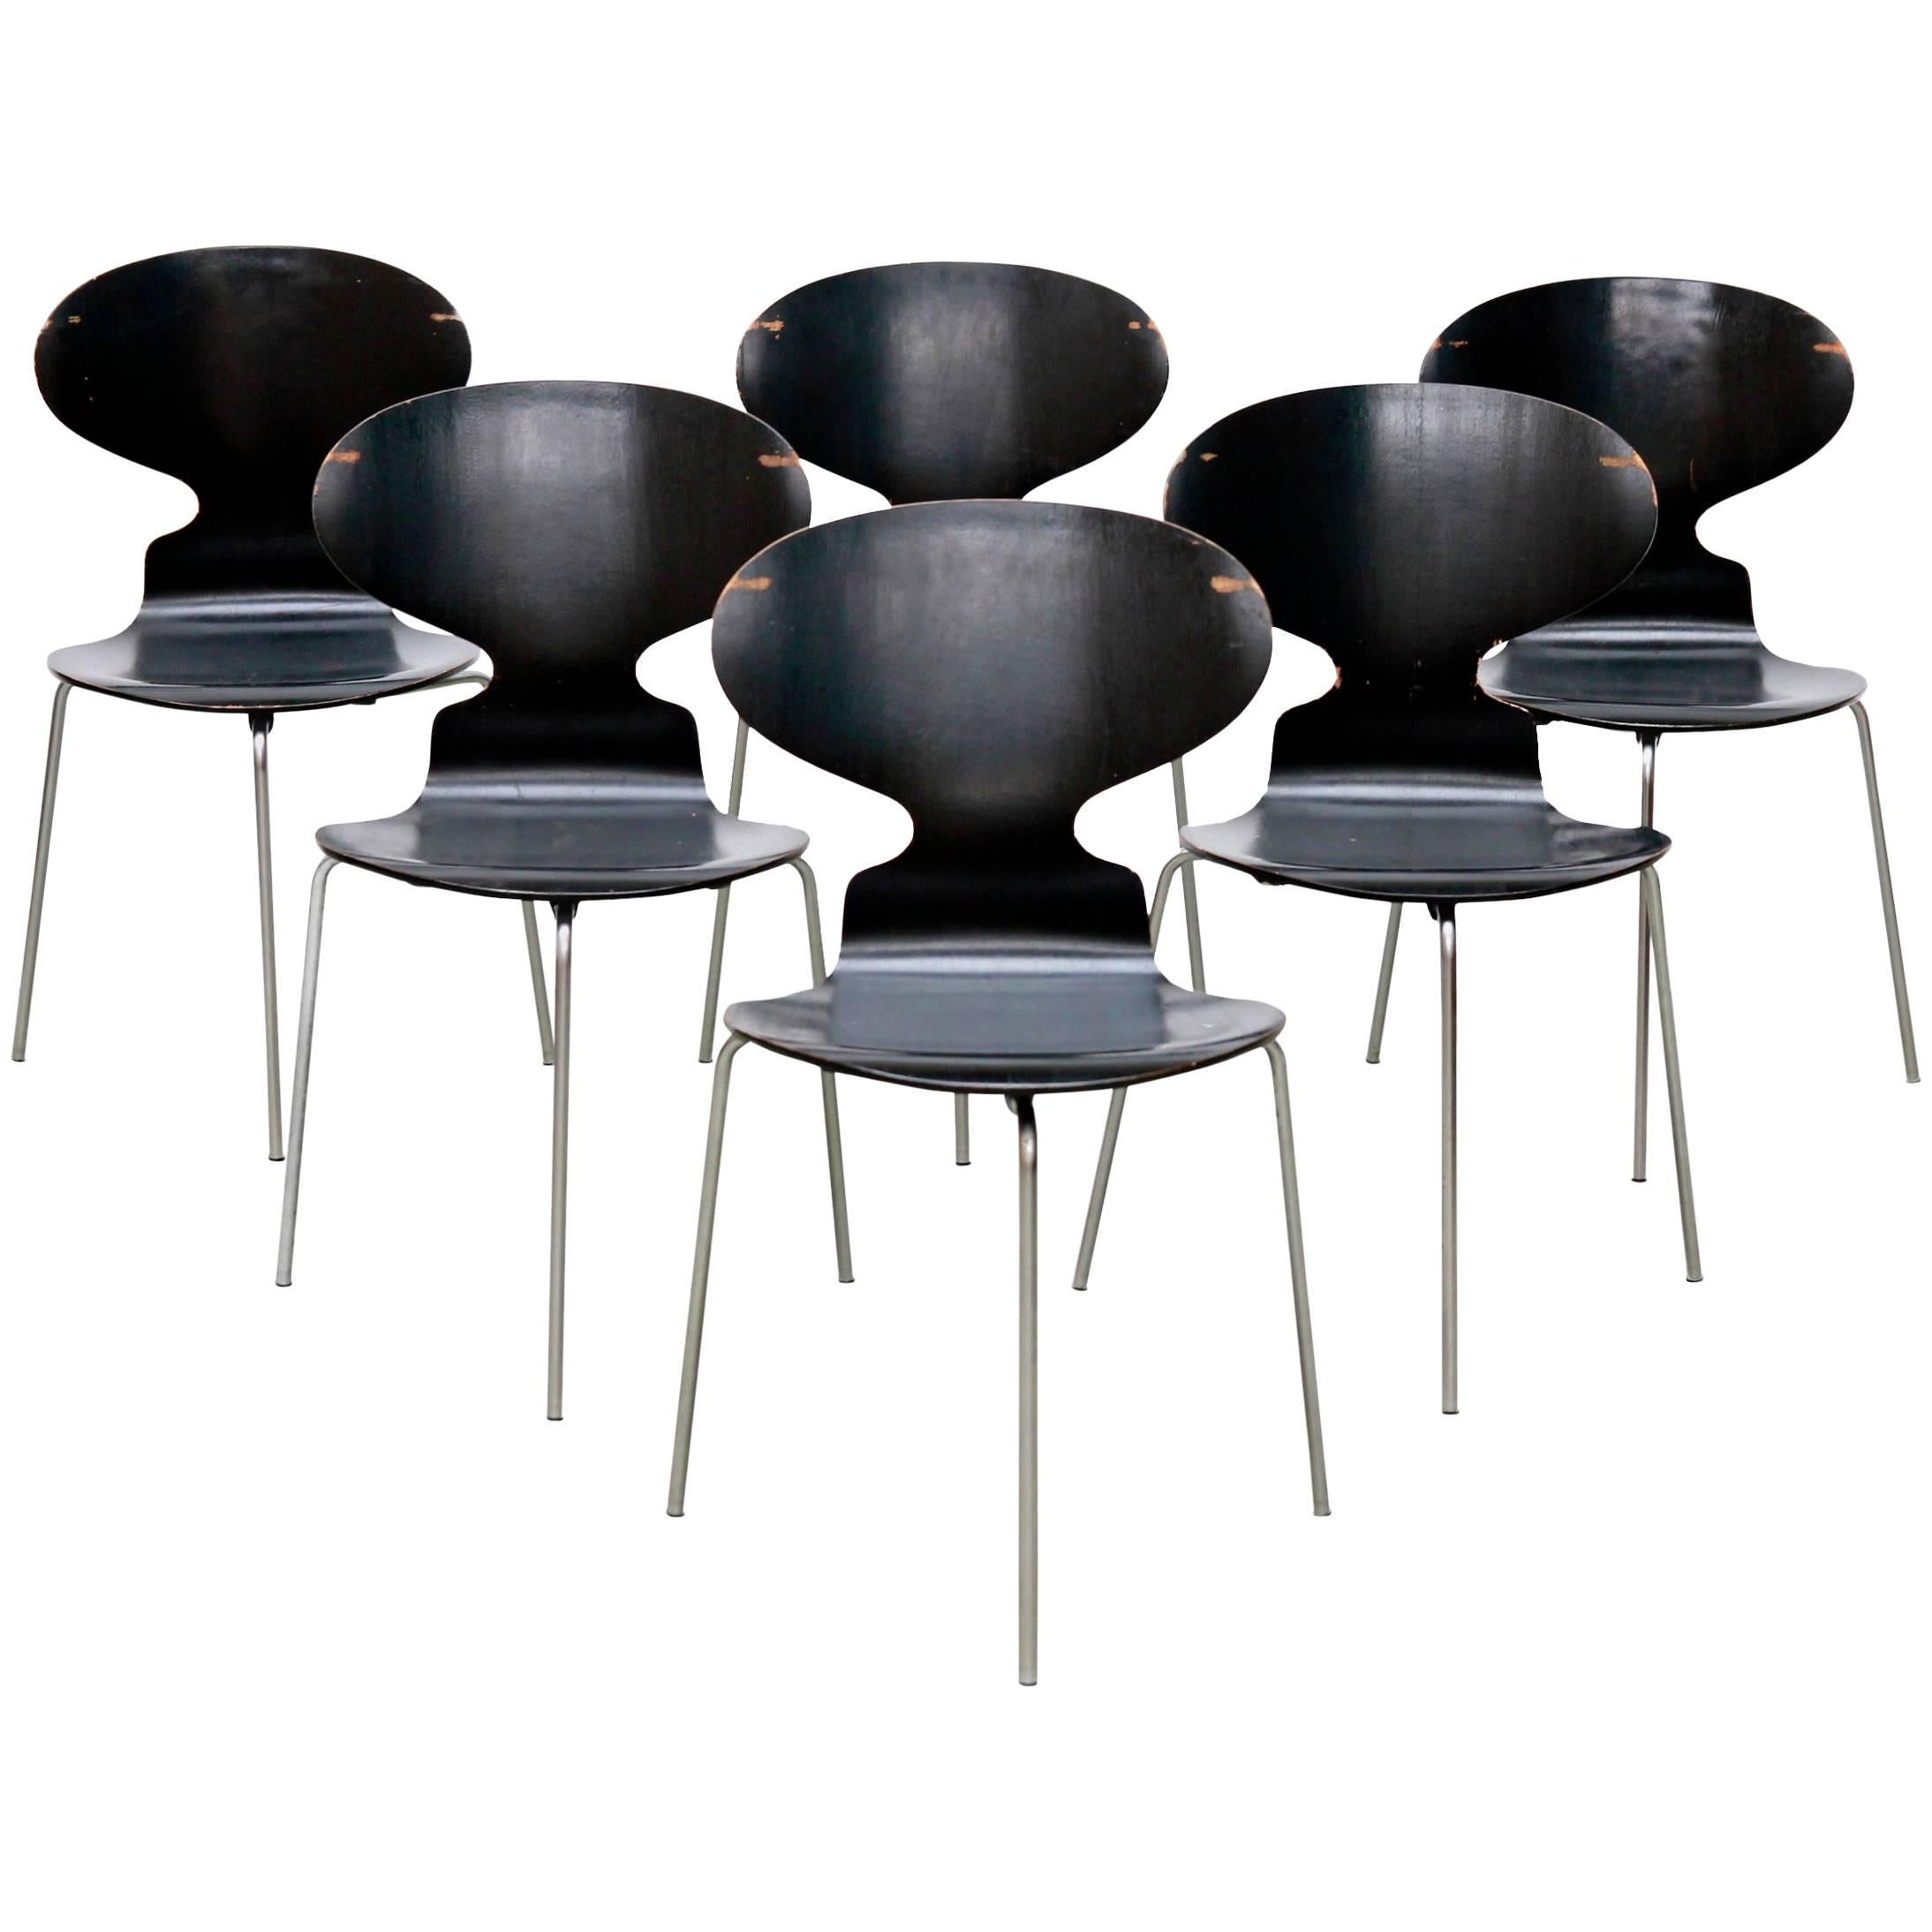 Model FH 3100 Ant Chairs by Arne Jacobsen for Fritz Hansen, 1969, Set of Six